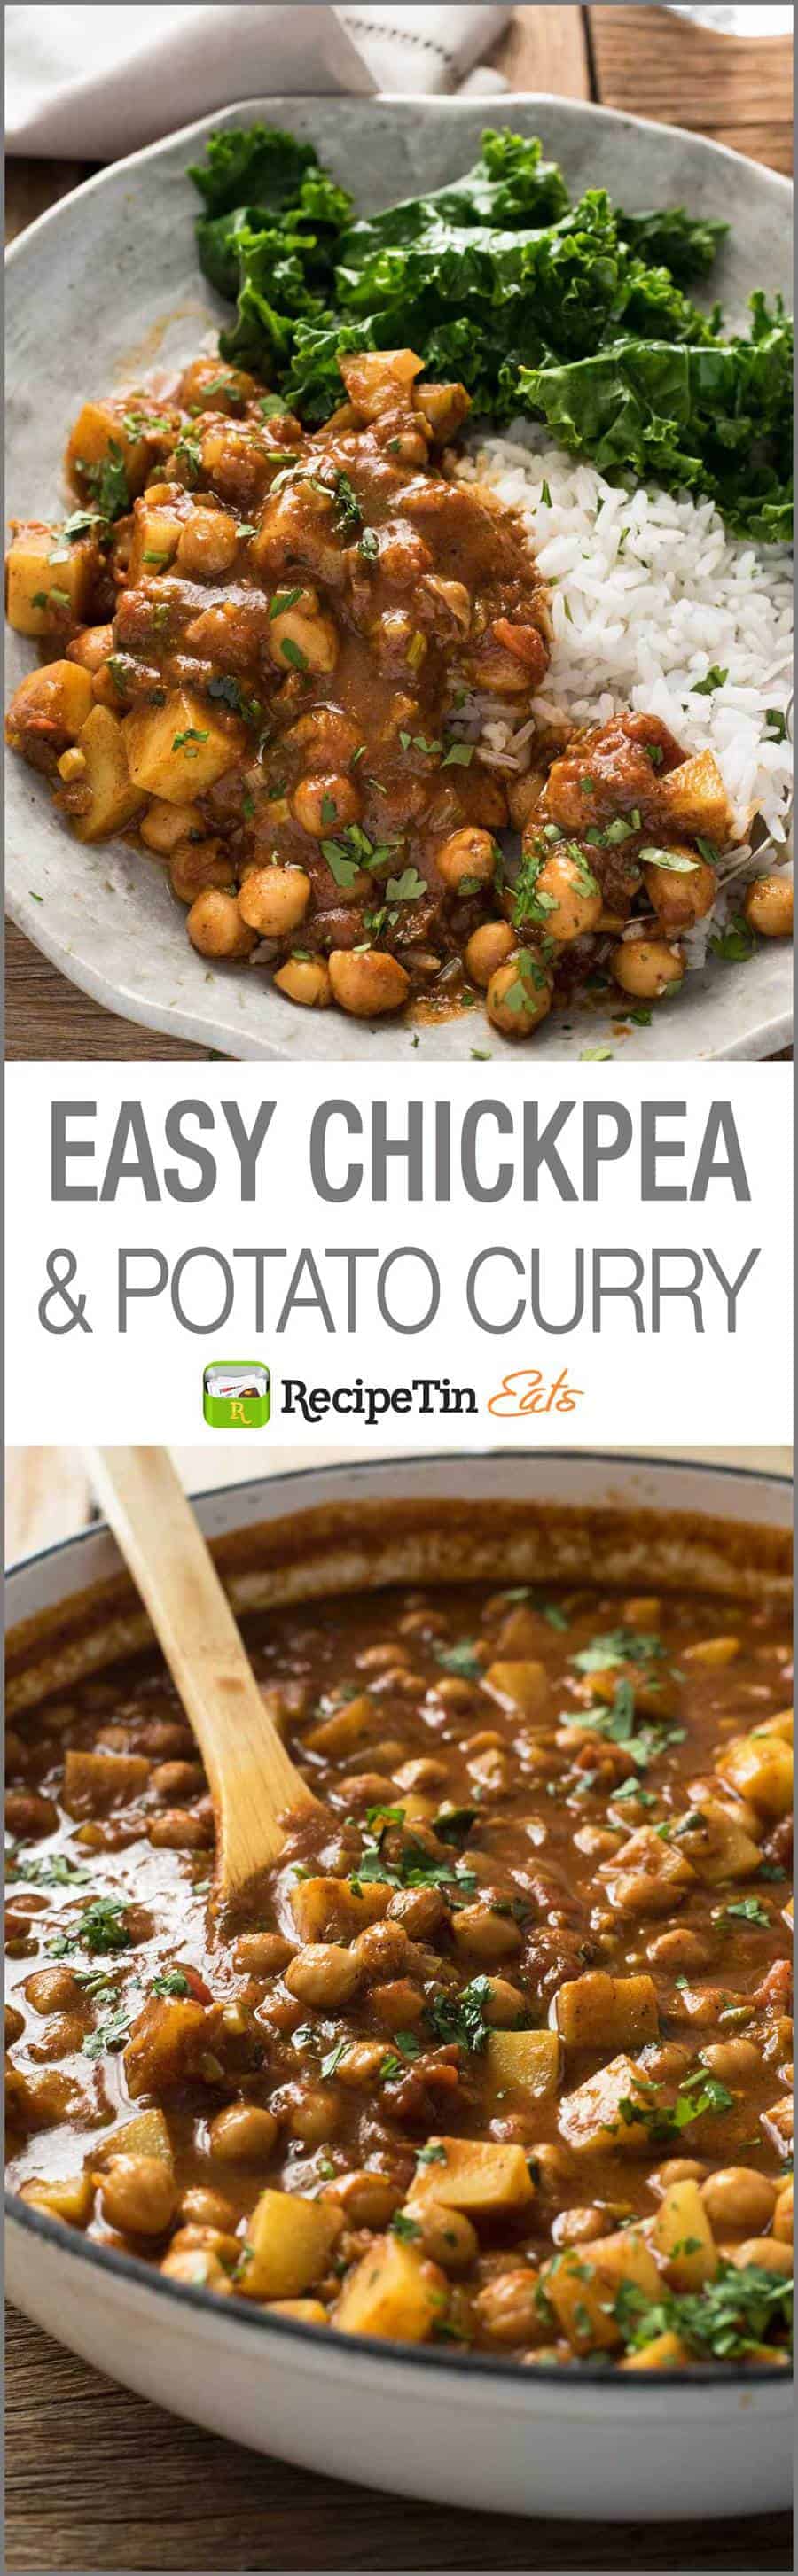 Chickpea Potato Curry - an authentic recipe that's so easy, made from scratch, no hunting down unusual ingredients. Incredible flavour! #trinidad #caribbean